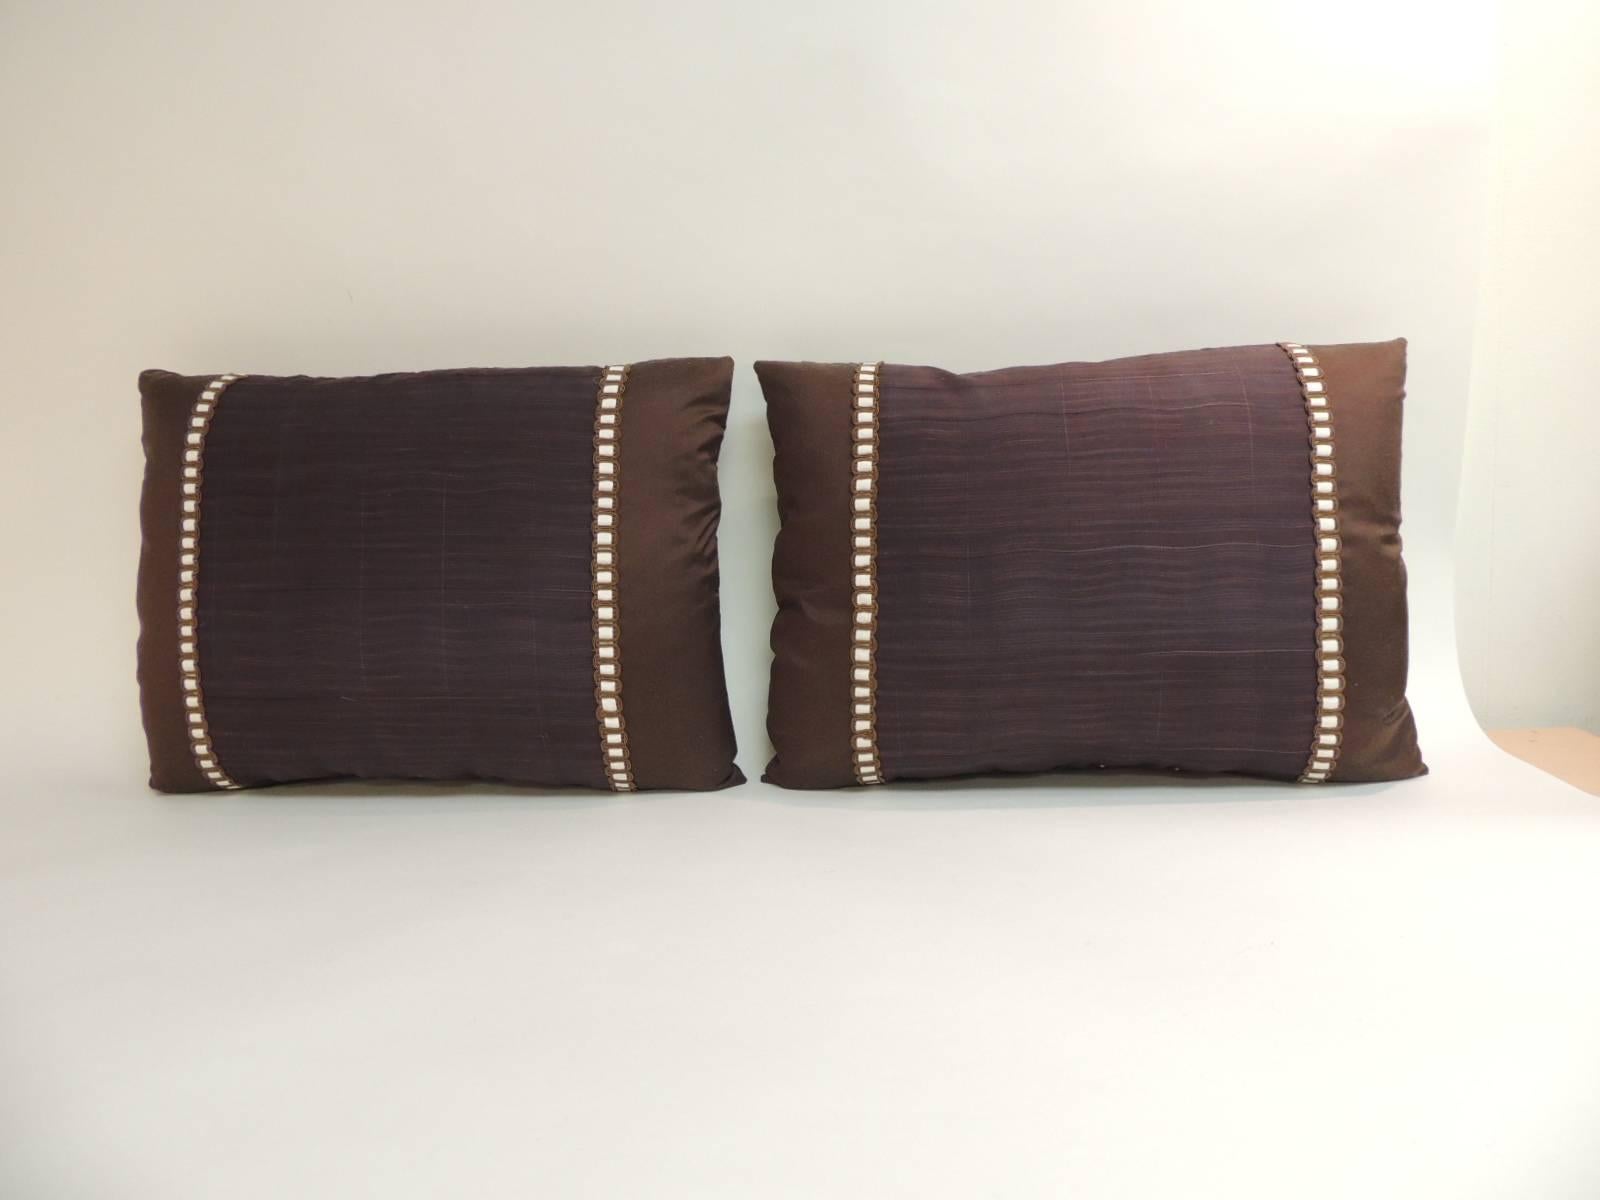 Pair of vintage brown and purple woven Obi textile bolsters decorative pillows.
Woven vintage decorative pillows handcrafted from an iridescent obi textile. Bolster decorative pillows framed with chocolate brown silk. Throw pillows embellished with